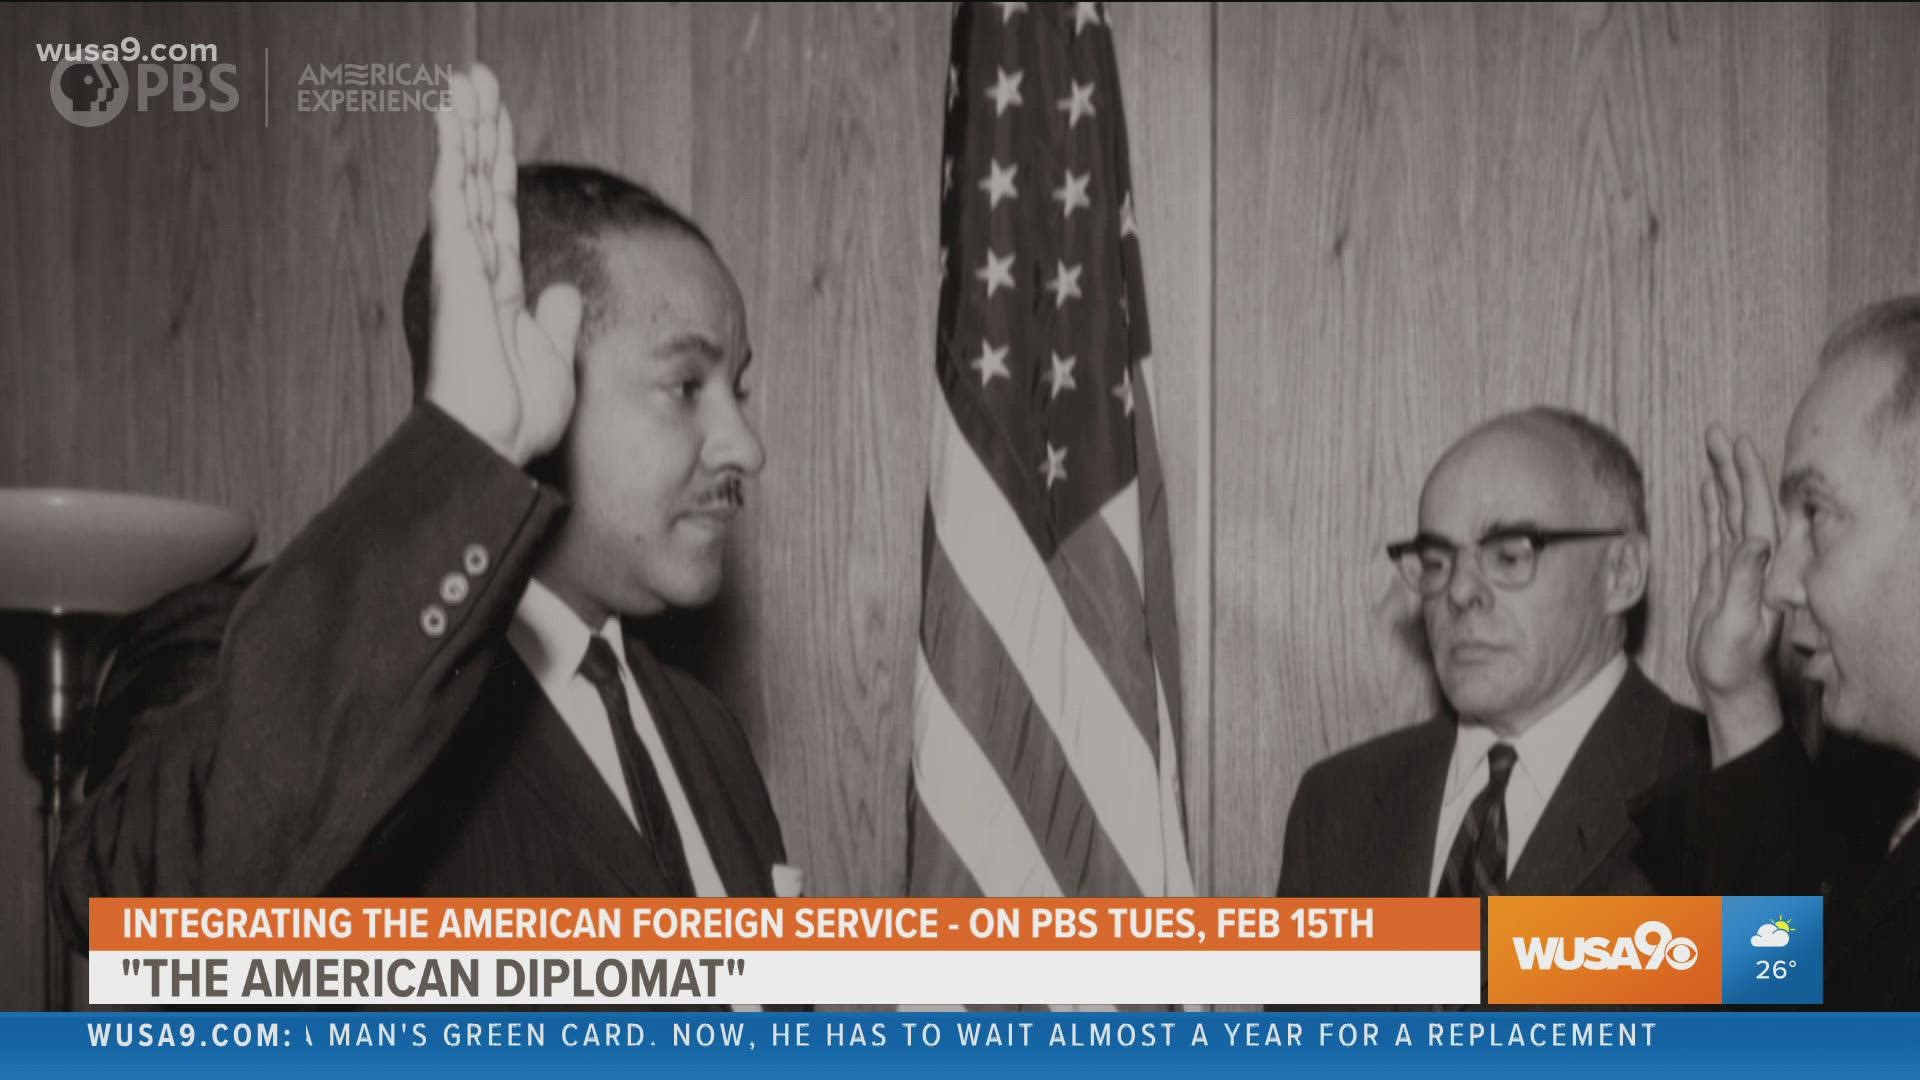 "The American Diplomat" director Leola Leola Calzolai-Stewart and son of Ambassador Edward Dudley share about the lives of Black U.S. Foreign Service Officers.